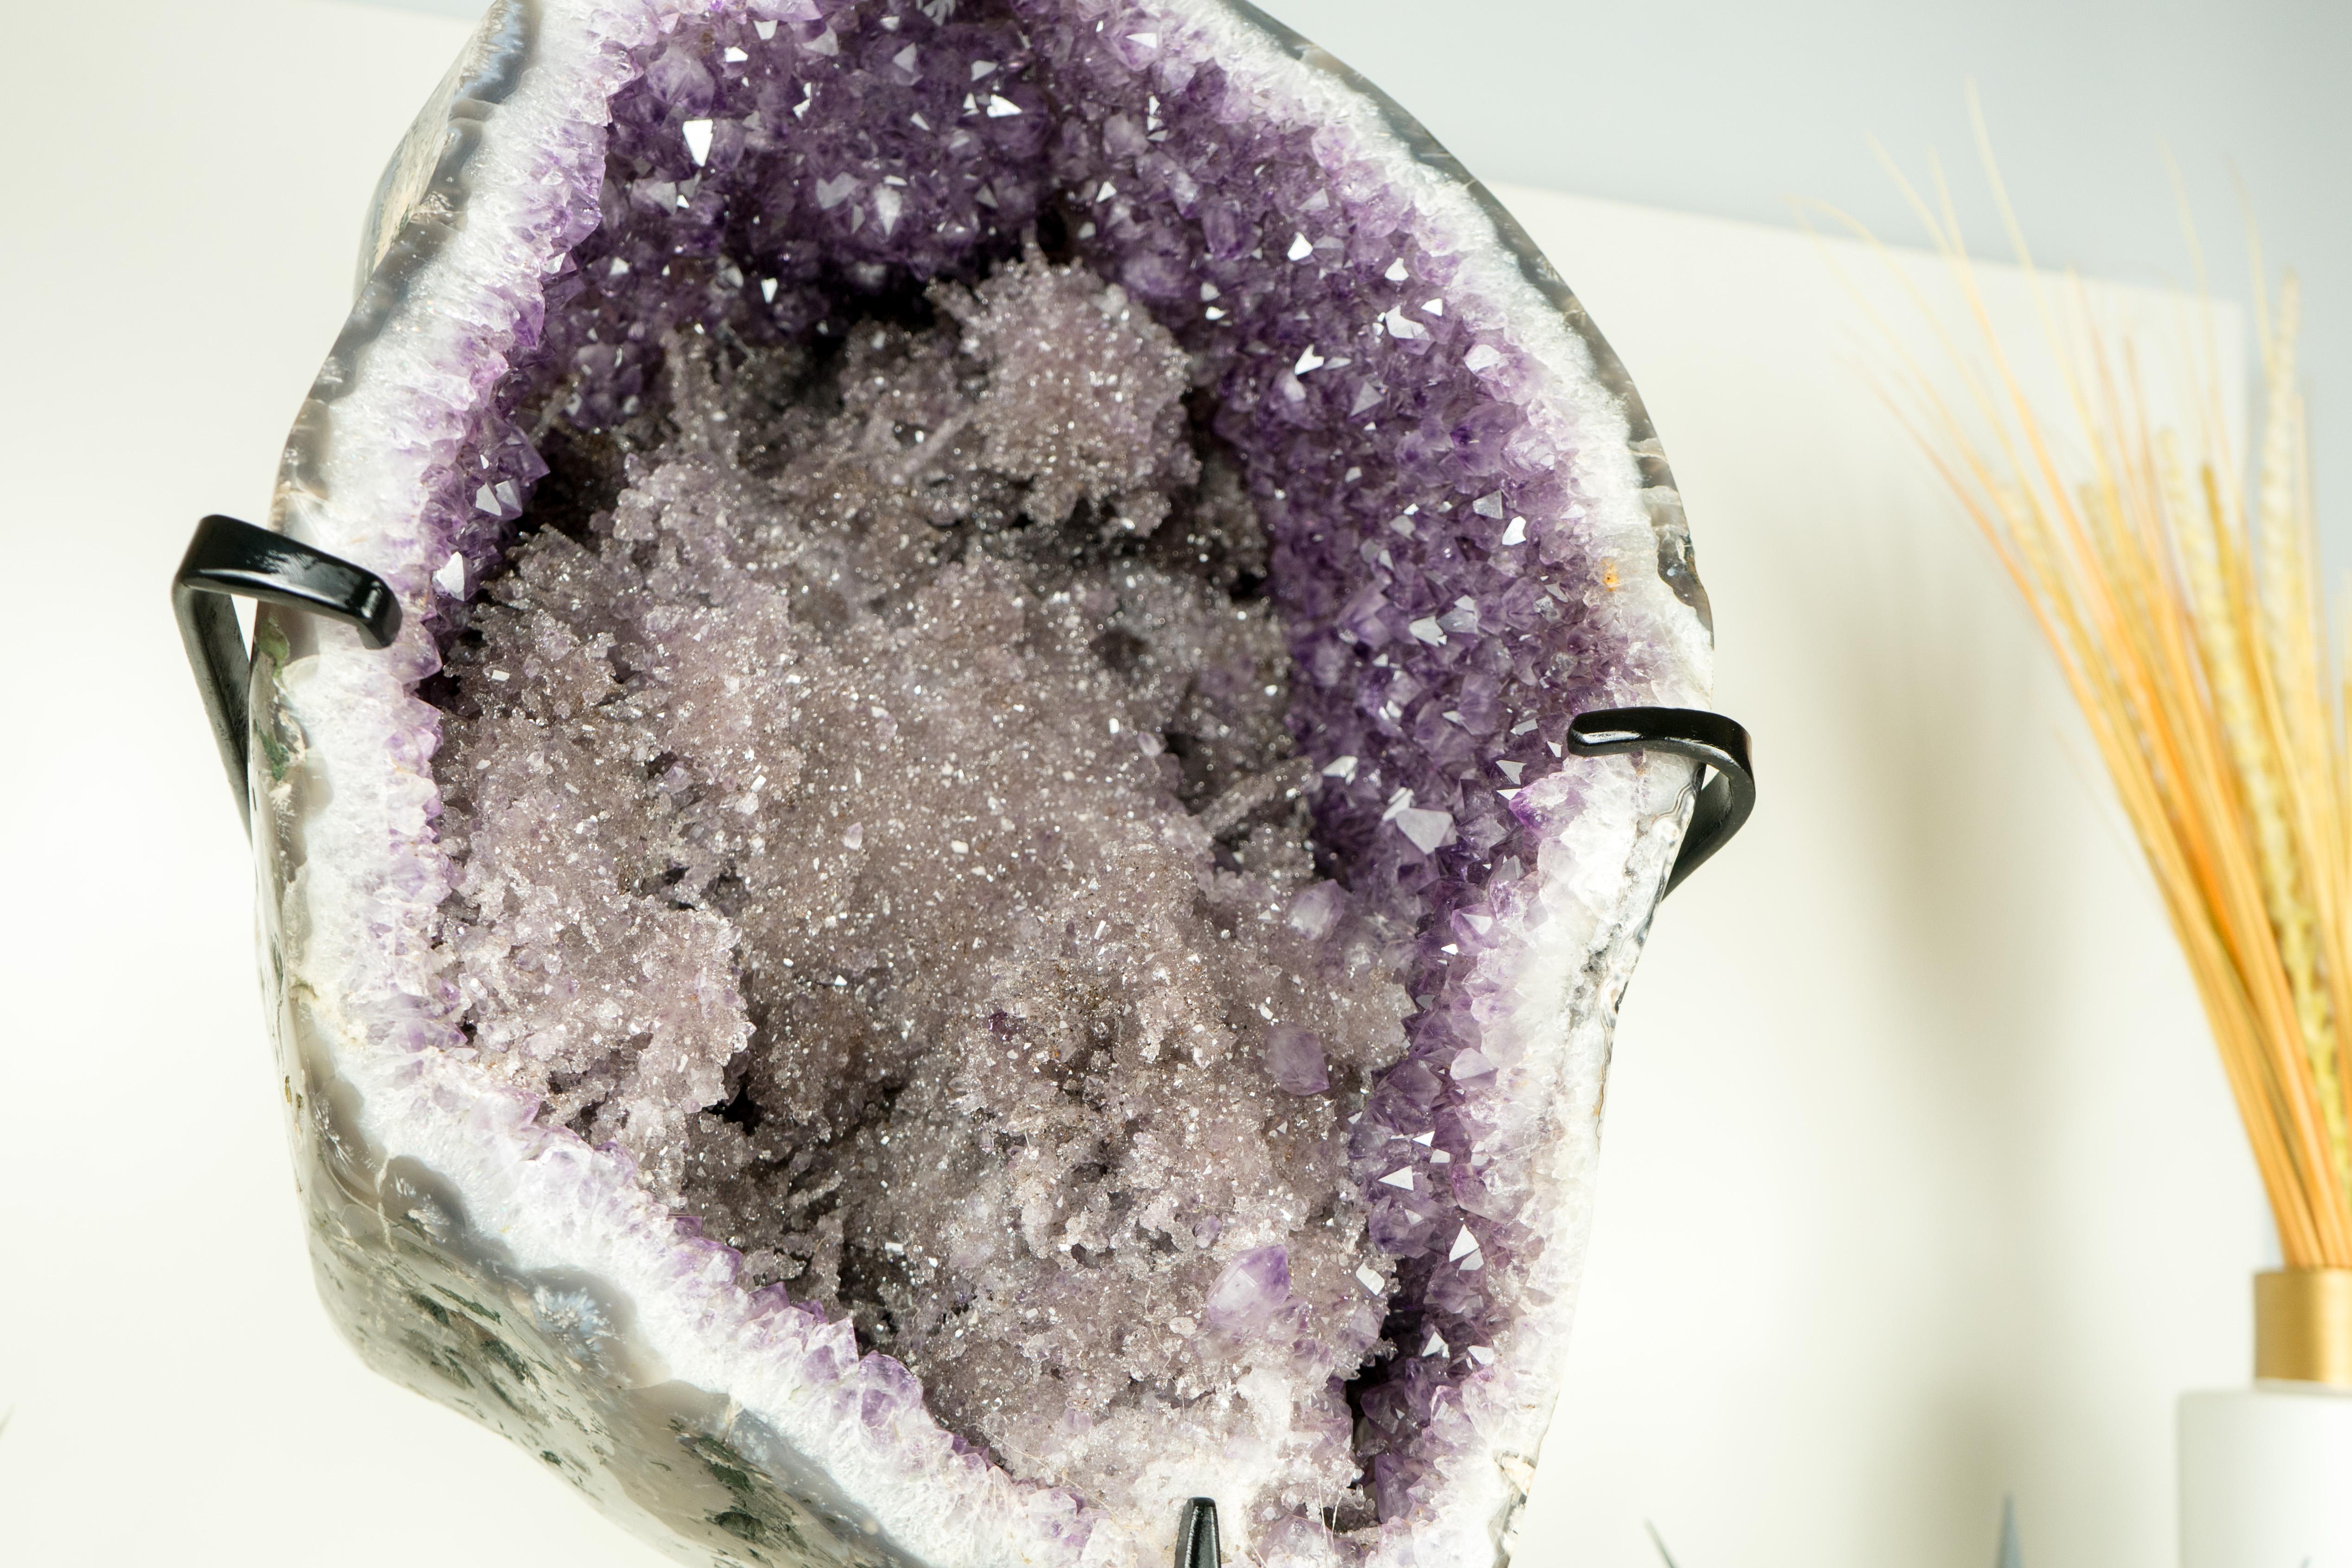 Rare Amethyst Geode with Rosette Crystals and Herkimer Diamond-like Clarity  For Sale 1